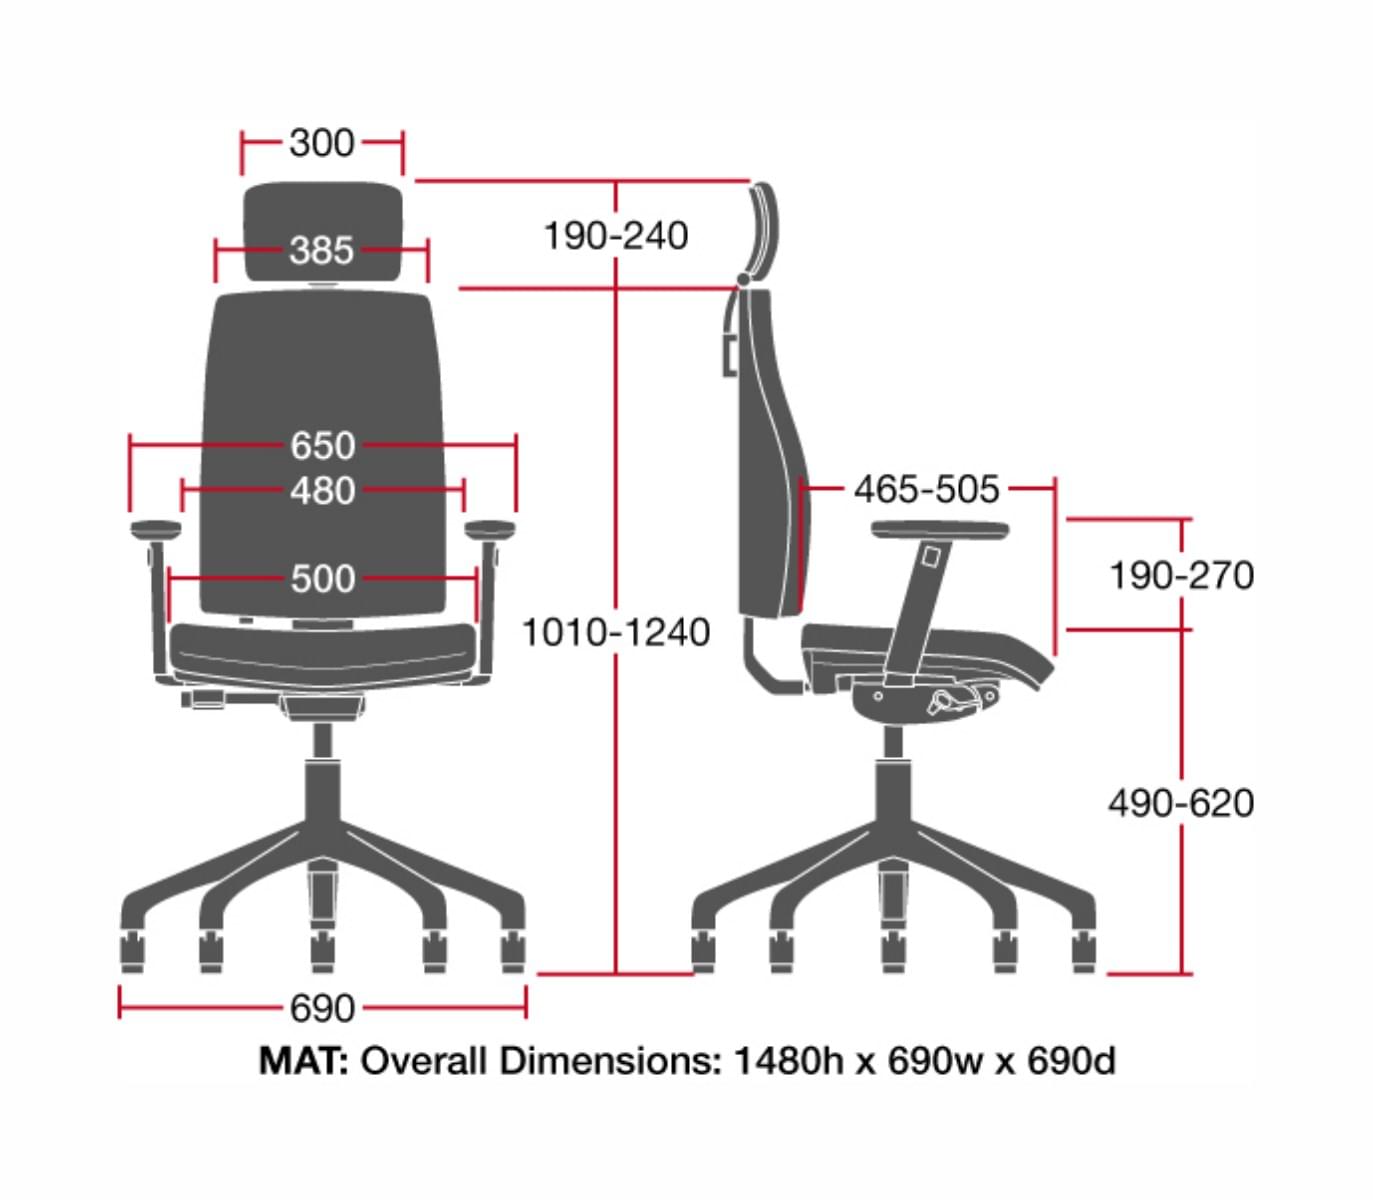 correct dimensions for mat chair